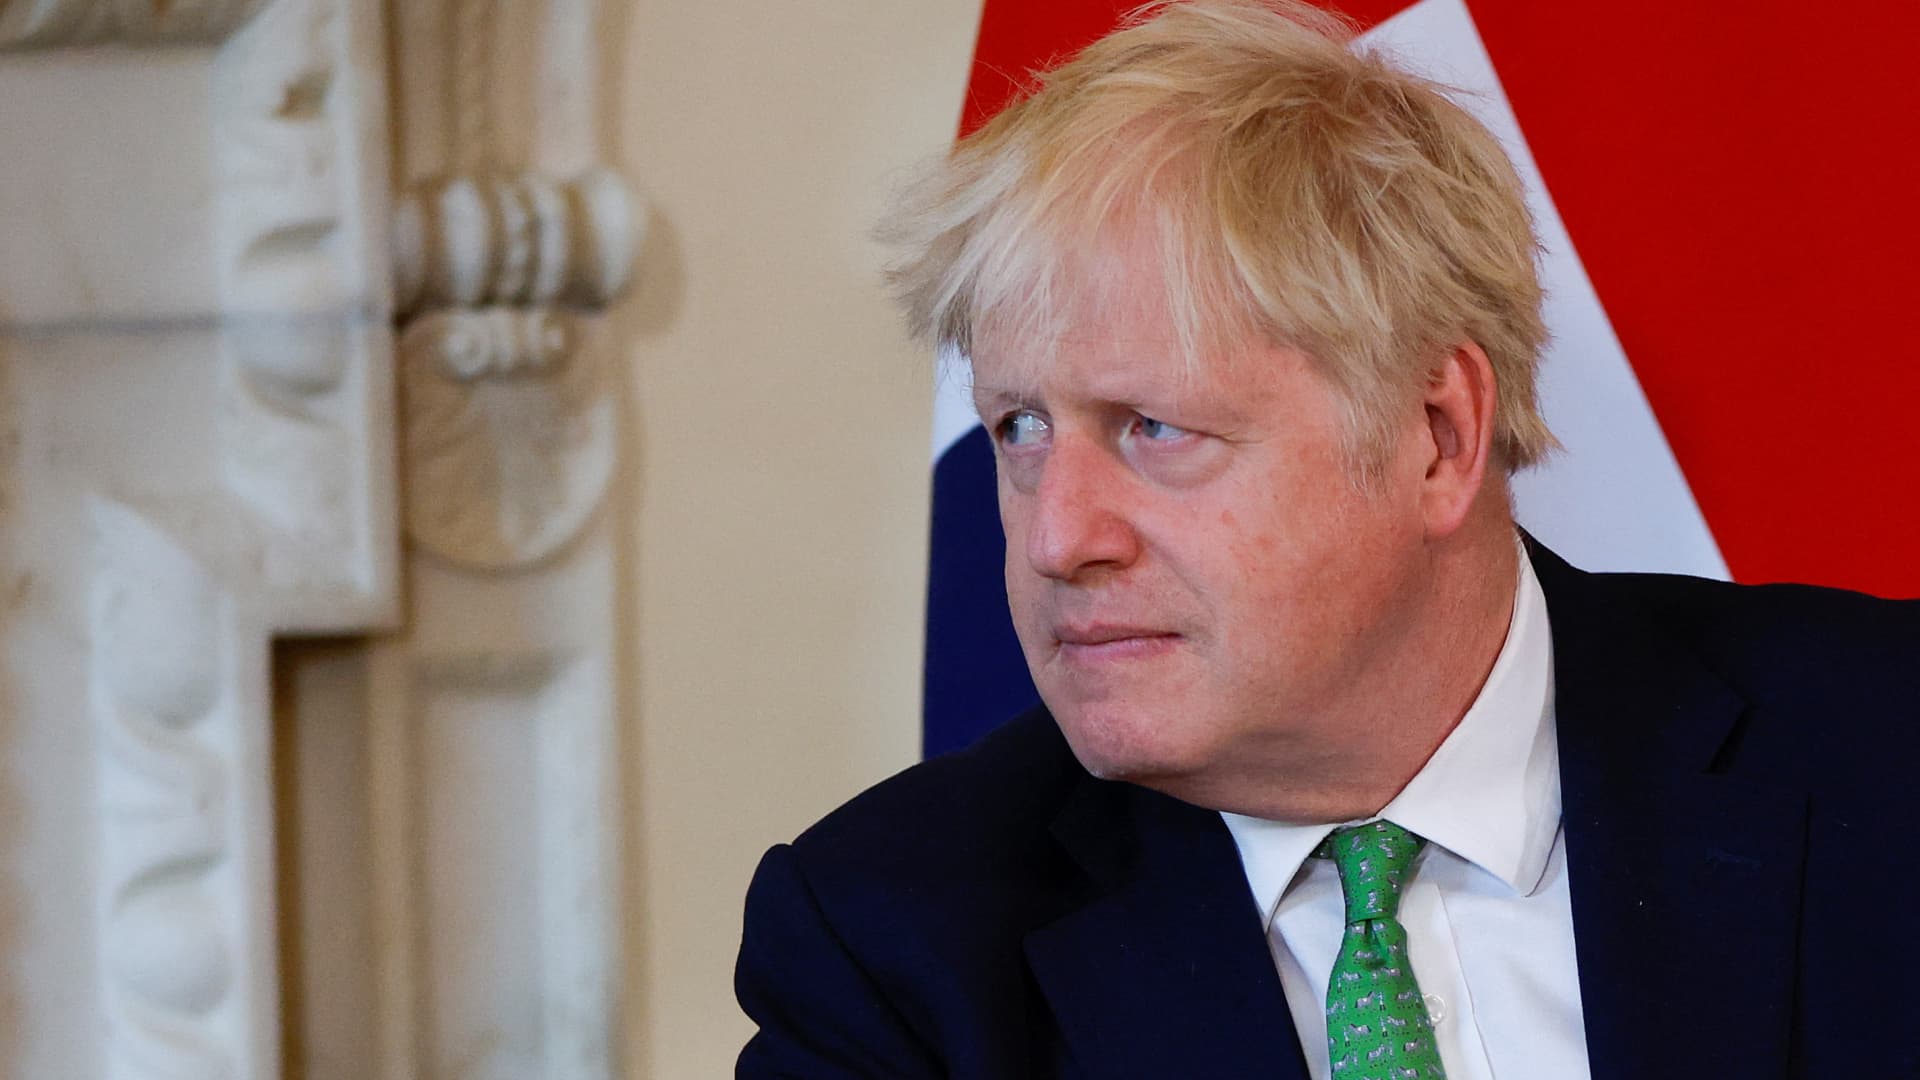 UK's Boris Johnson fights for his political survival after top resignations and scandals - CNBC : But he shows no signs of being ready to stand down. Last night, he reshuffled his ministerial team to fill vacancies created by the resignations.  | Tranquility 國際社群